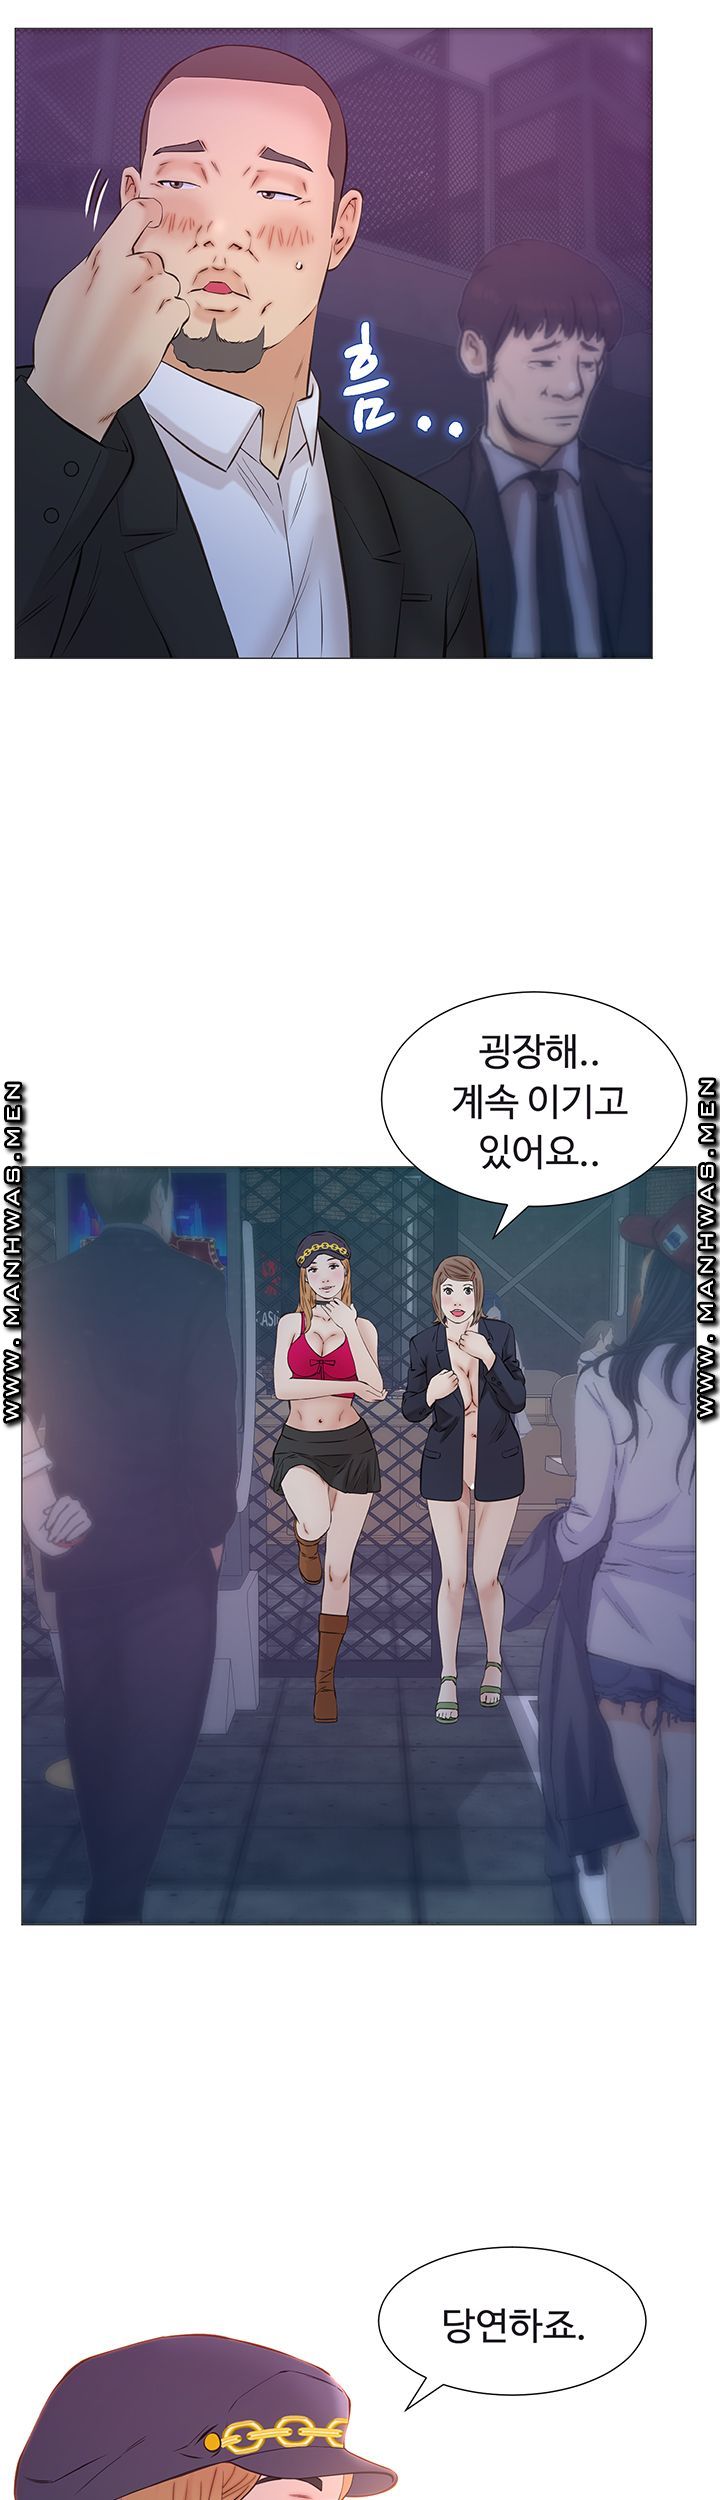 Gamble Raw - Chapter 41 Page 19